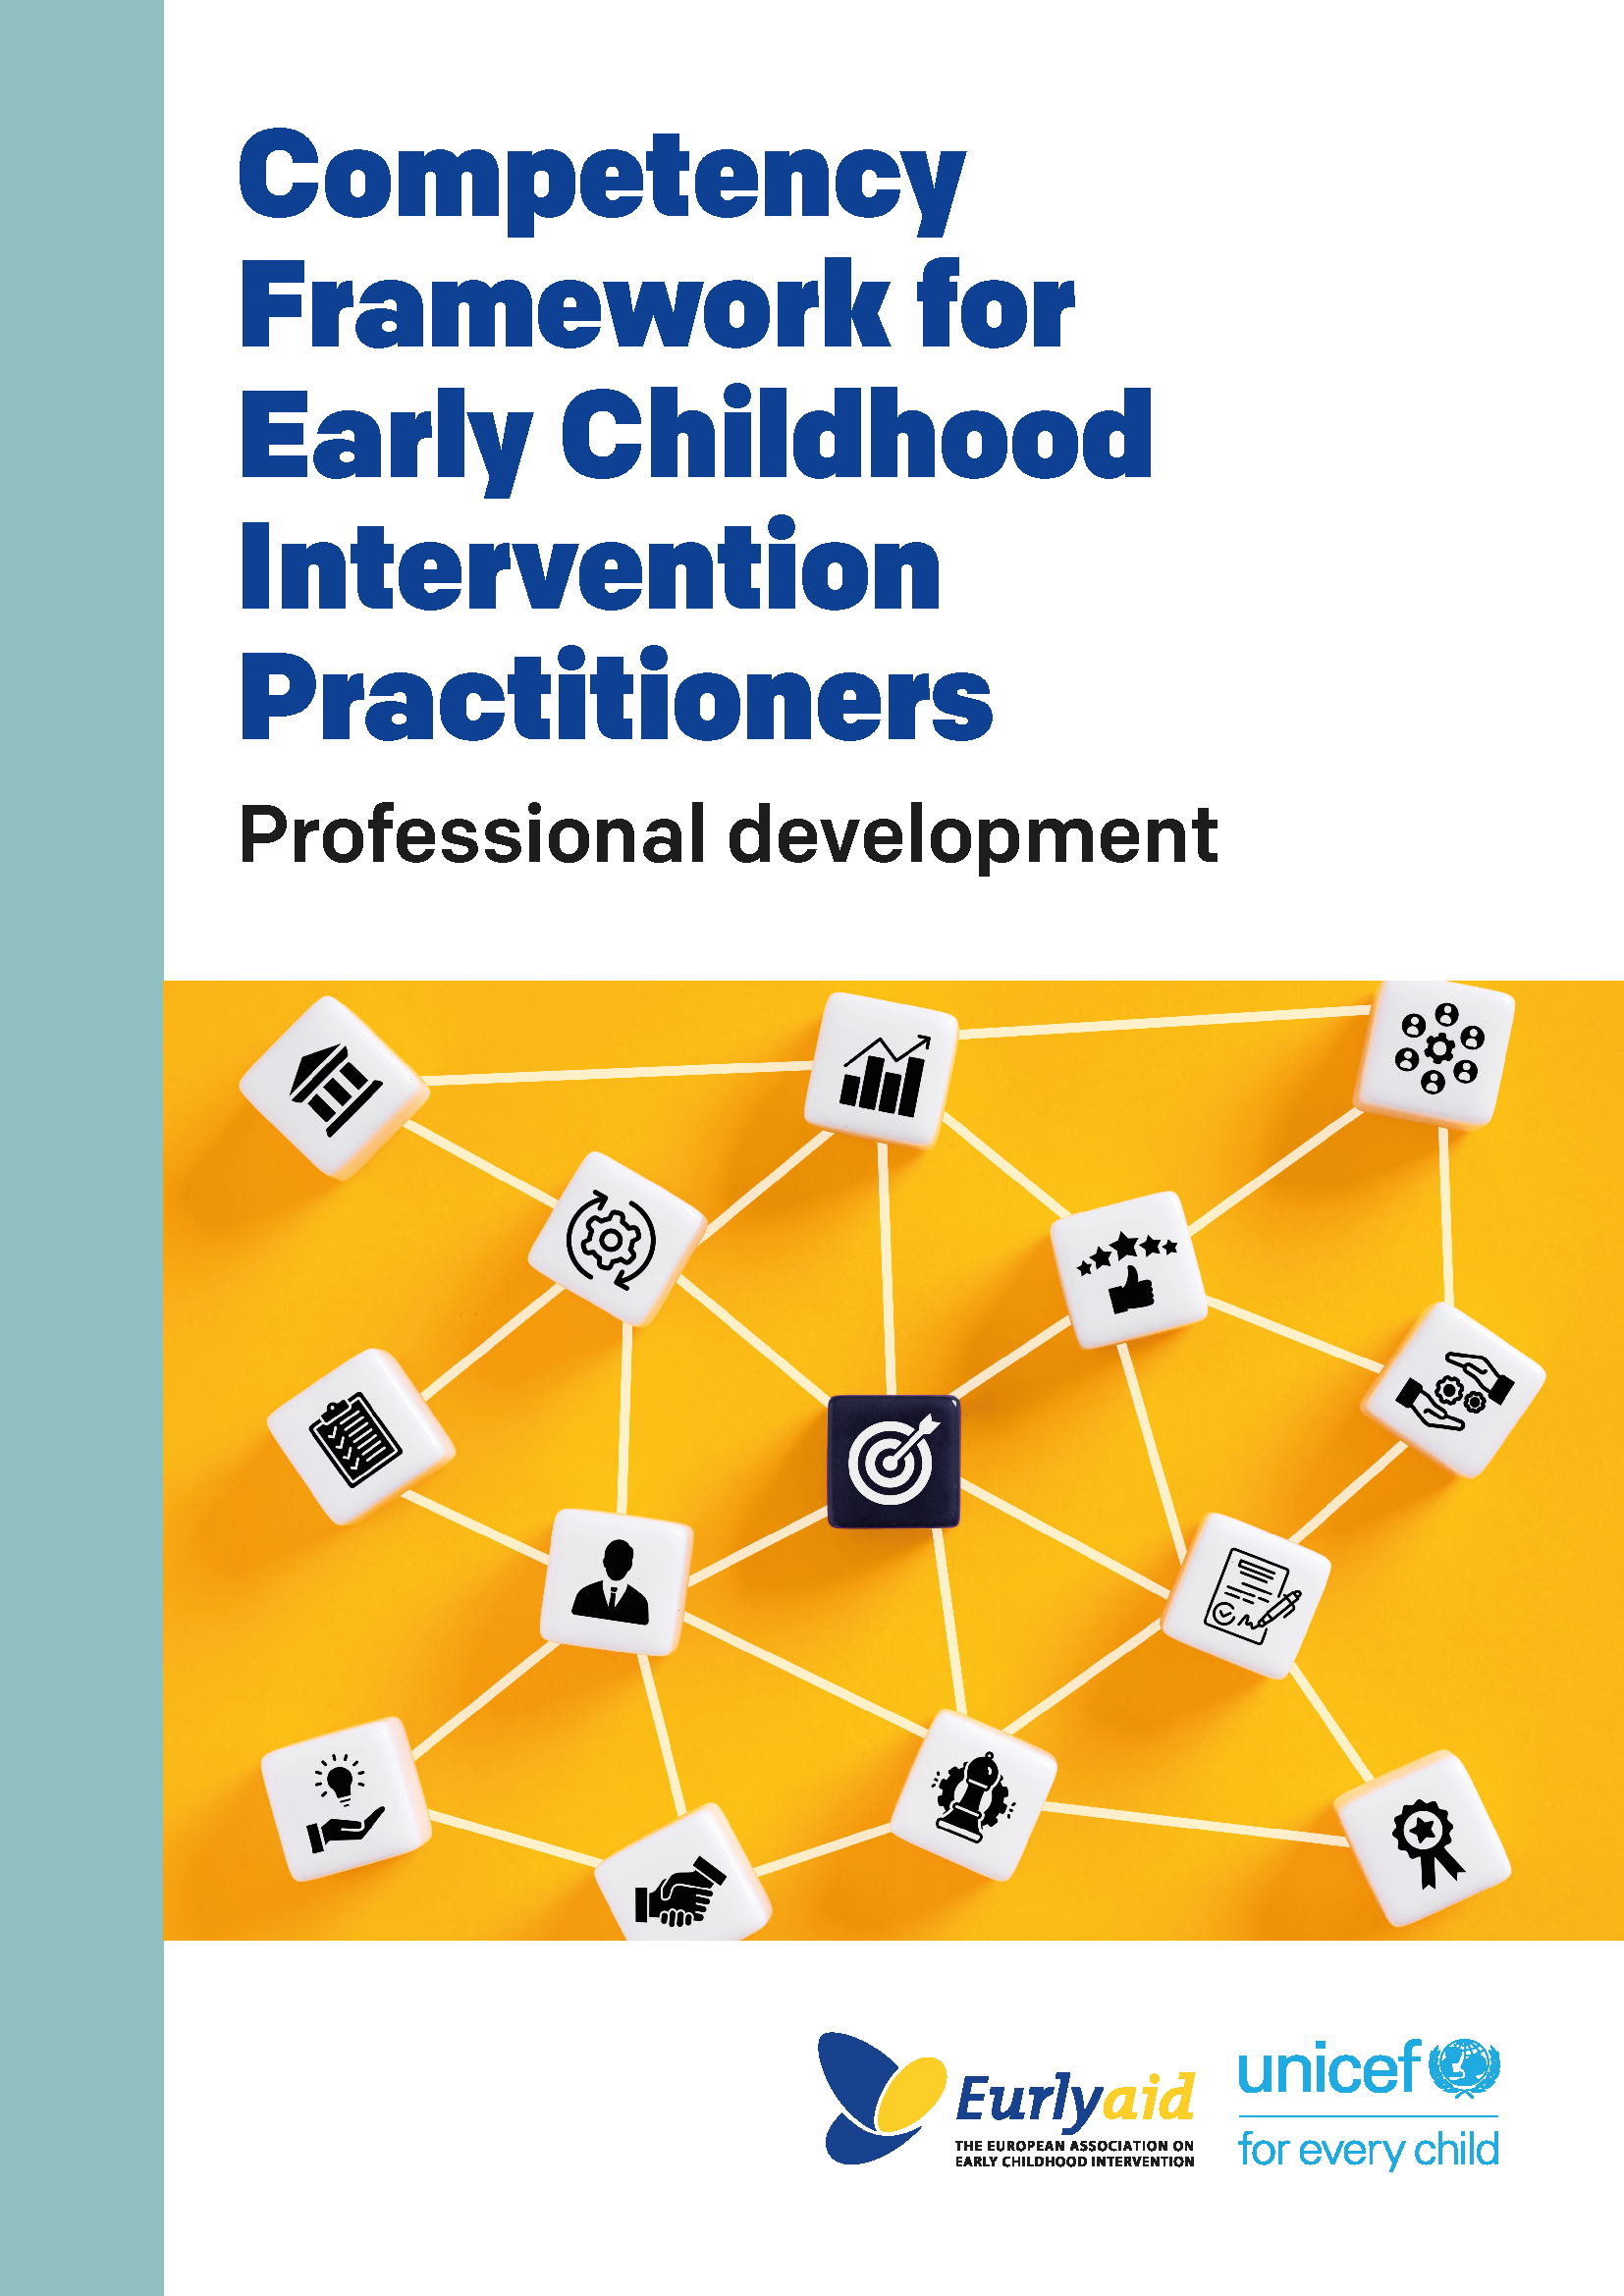 Competency Framework for Early Childhood Intervention Practitioners